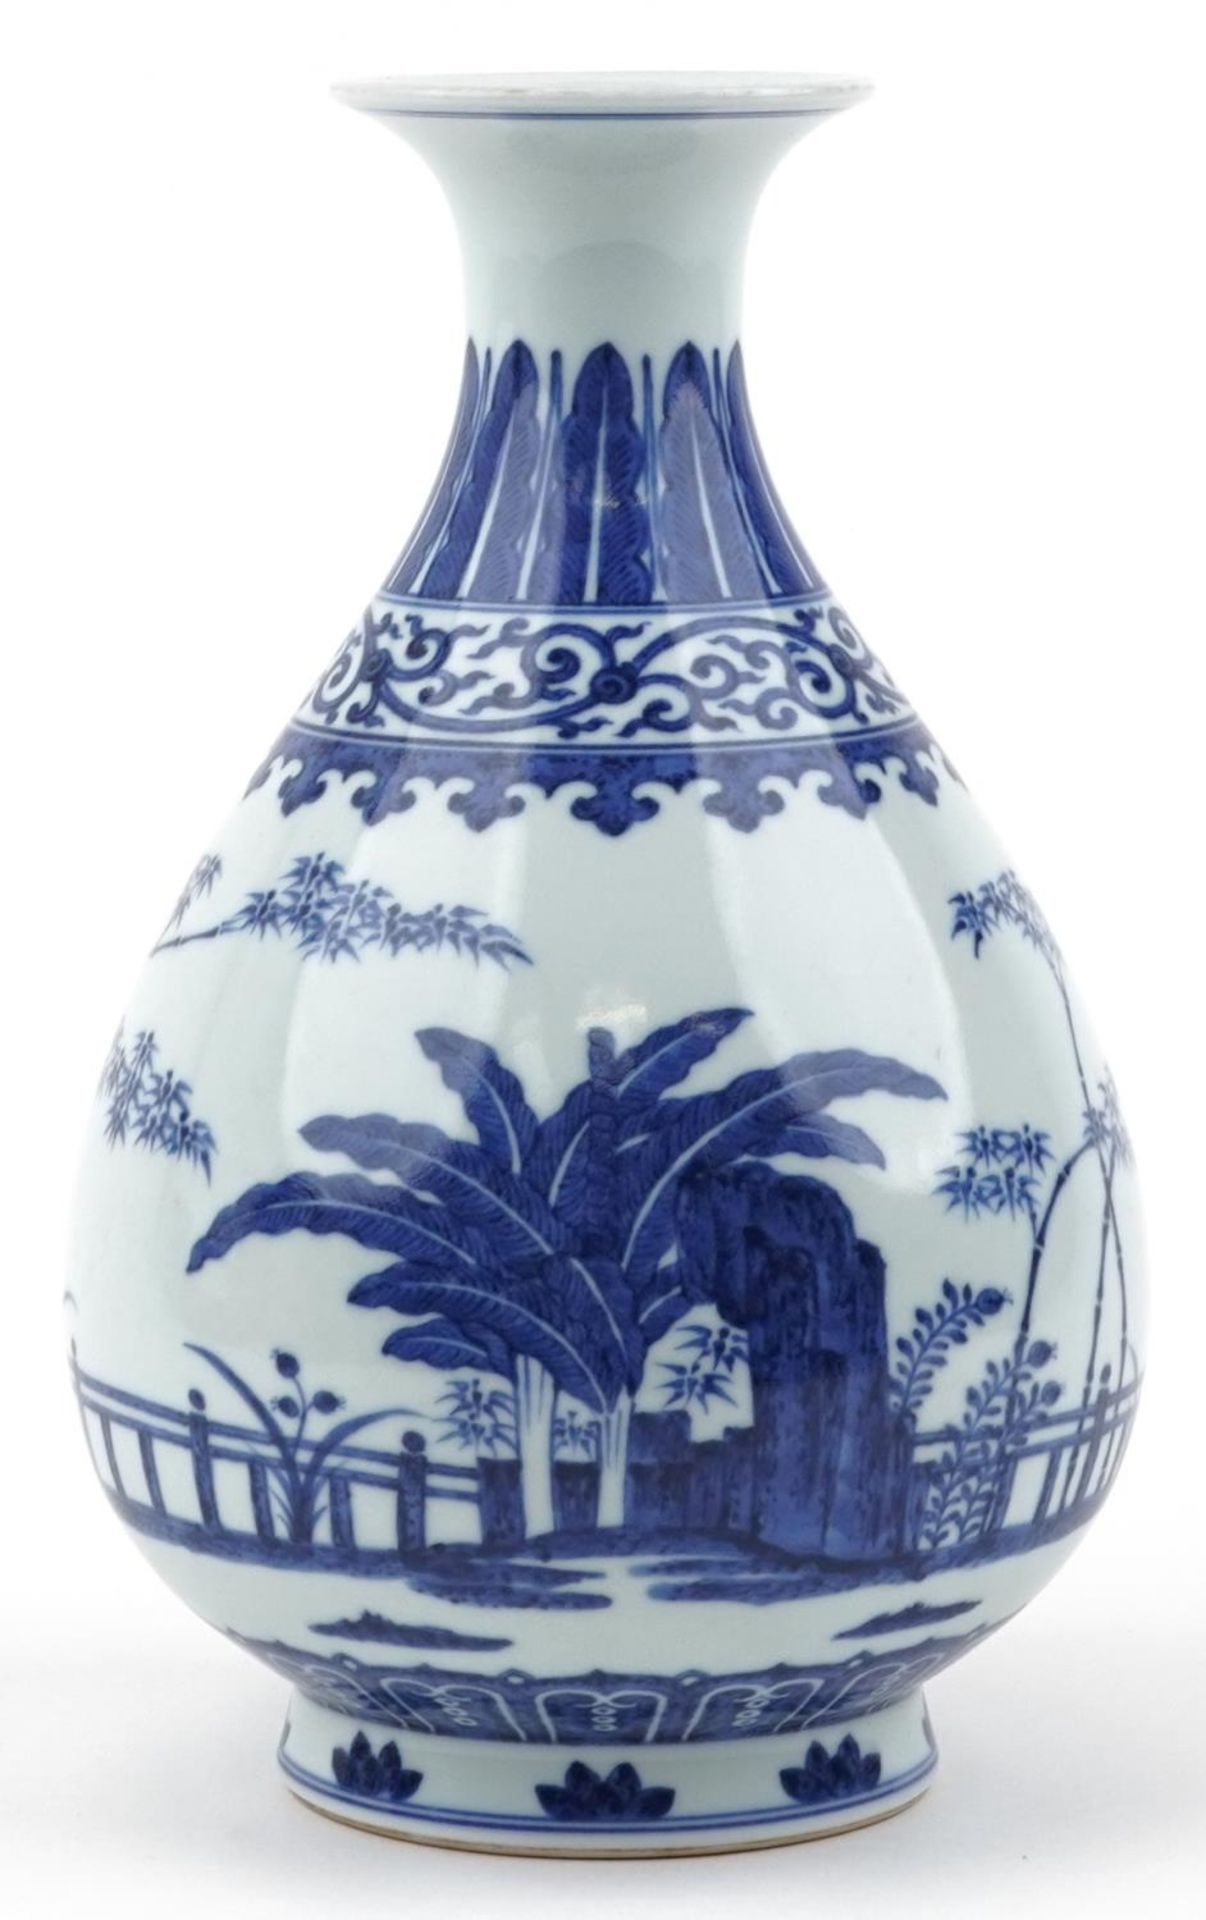 Chinese blue and white porcelain vase hand painted with a palace setting, six figure character marks